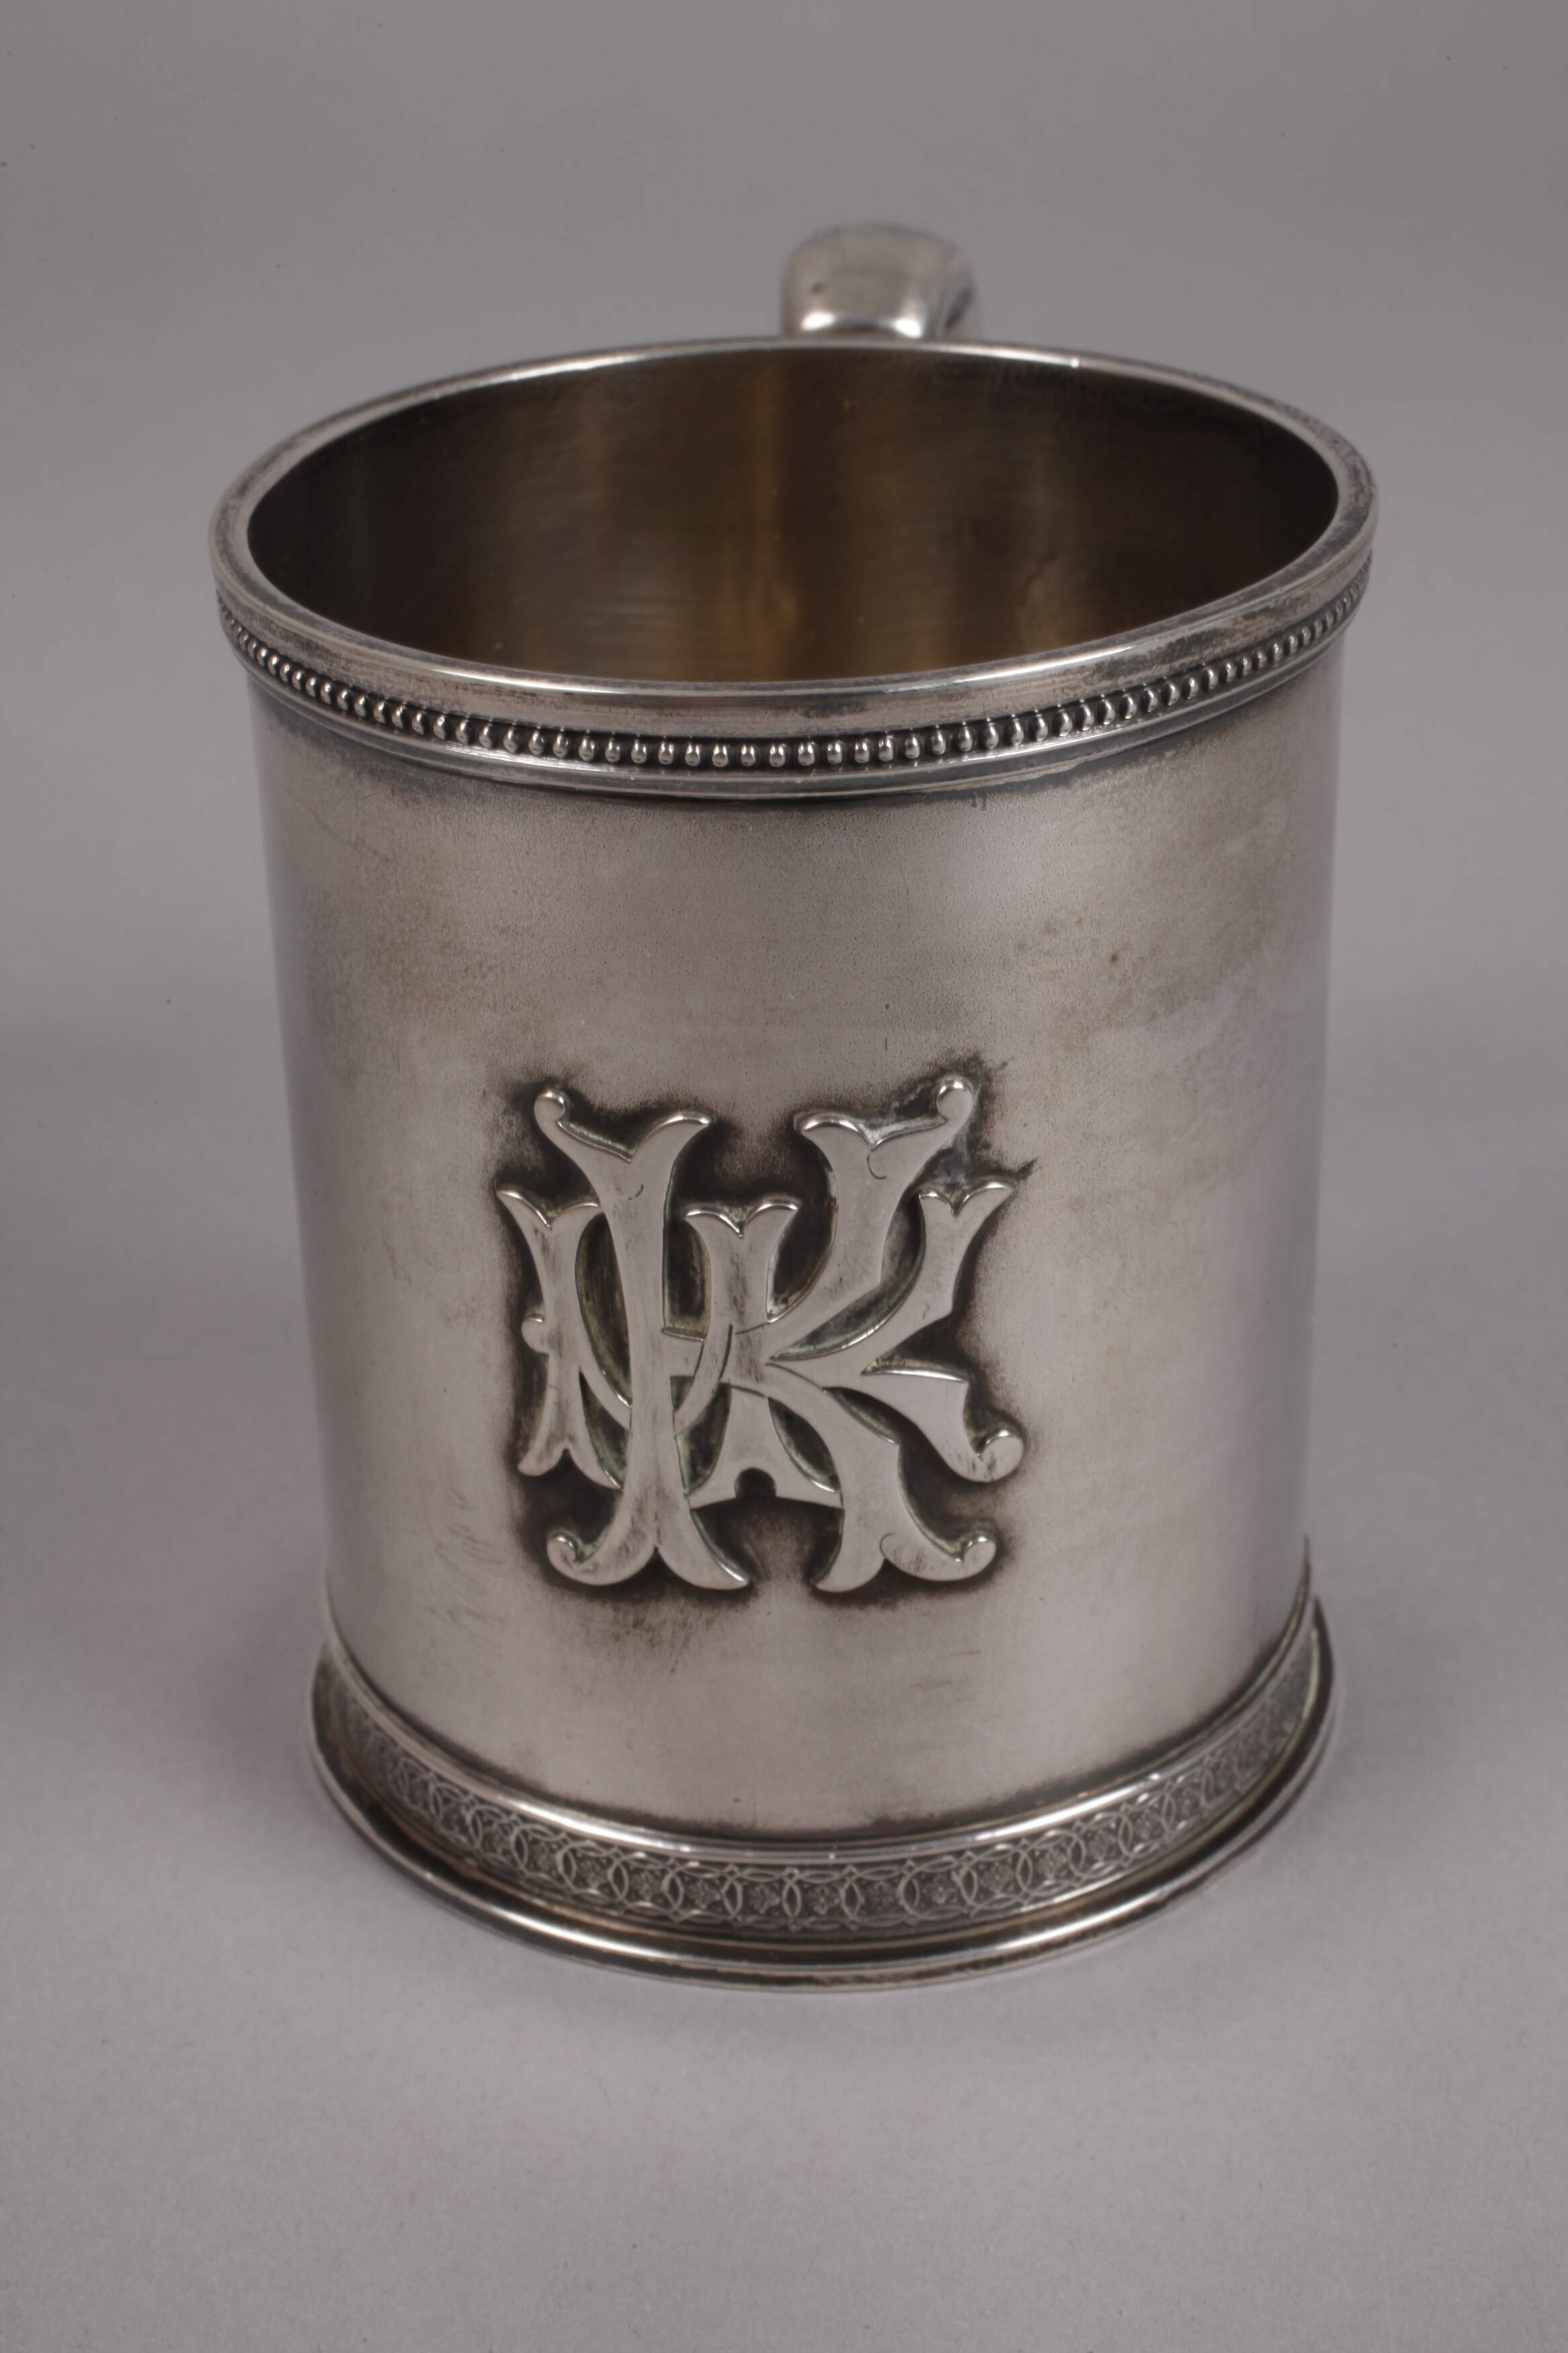 Tiffany Silver Cup - Image 3 of 4